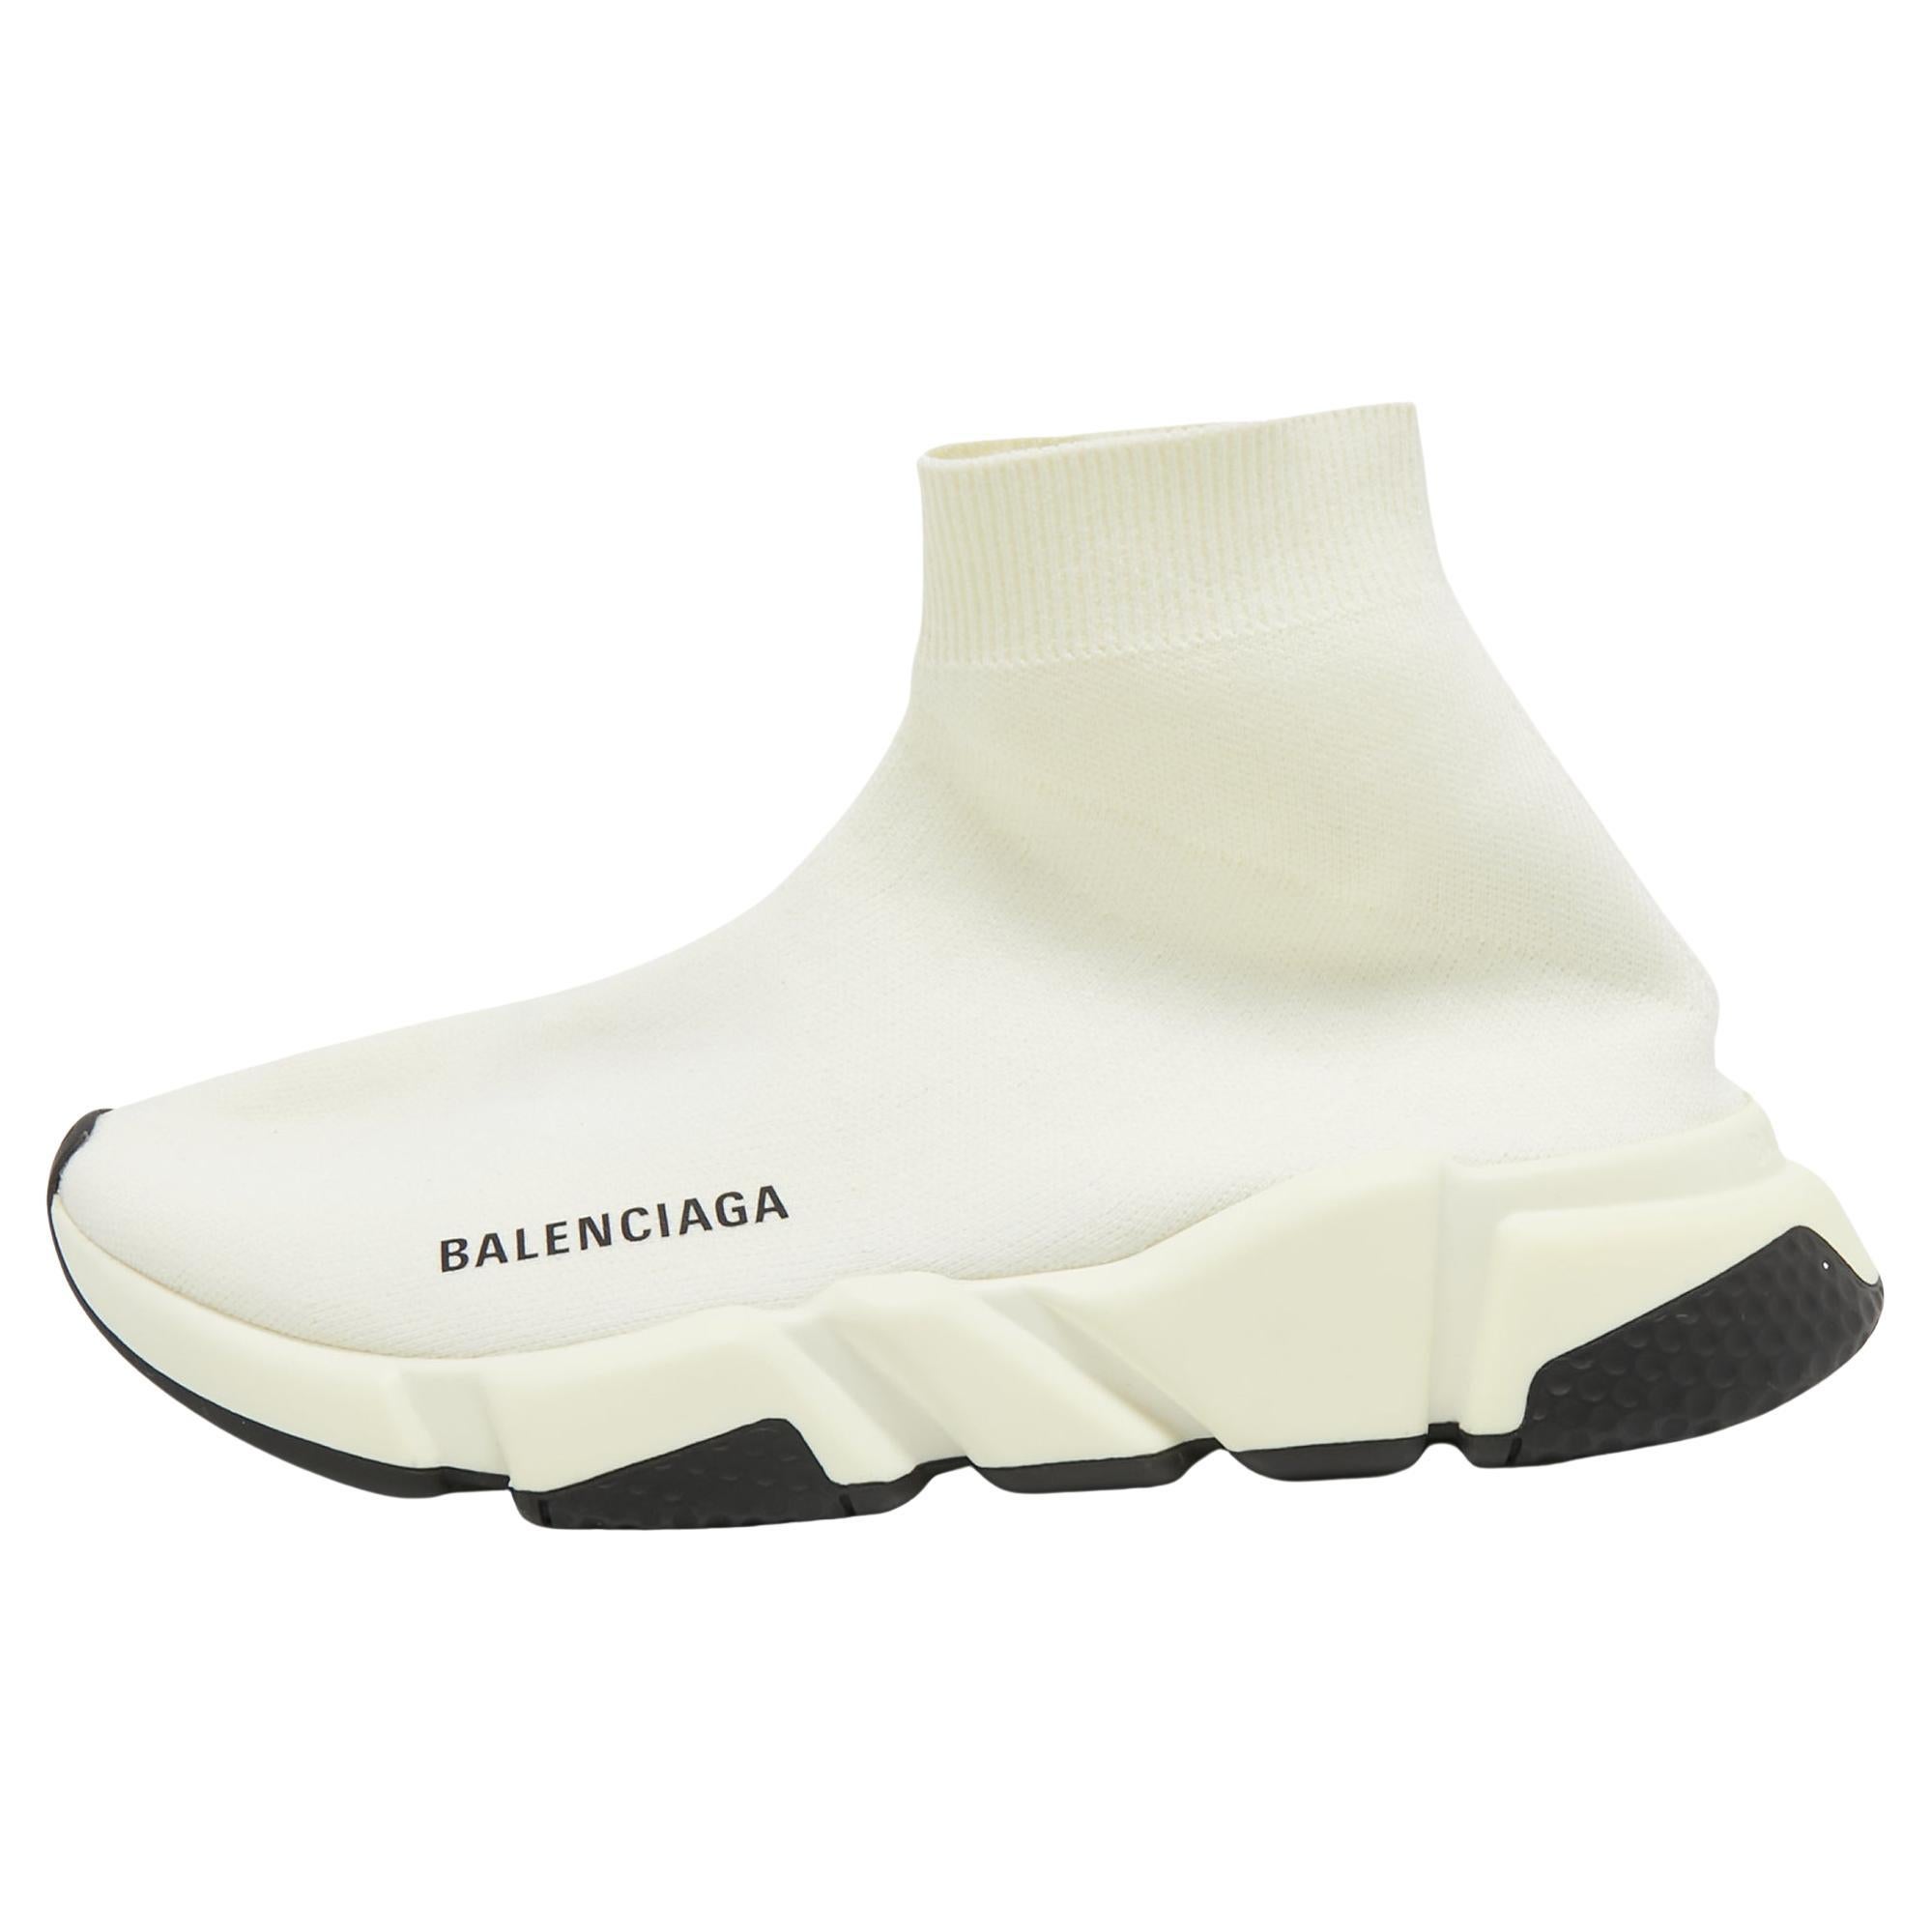 Balenciaga Speed Trainer - 5 For Sale on 1stDibs | balenciaga speed trainer  sale, balenciaga speed 2.0 sale, balenciaga speed trainer on sale